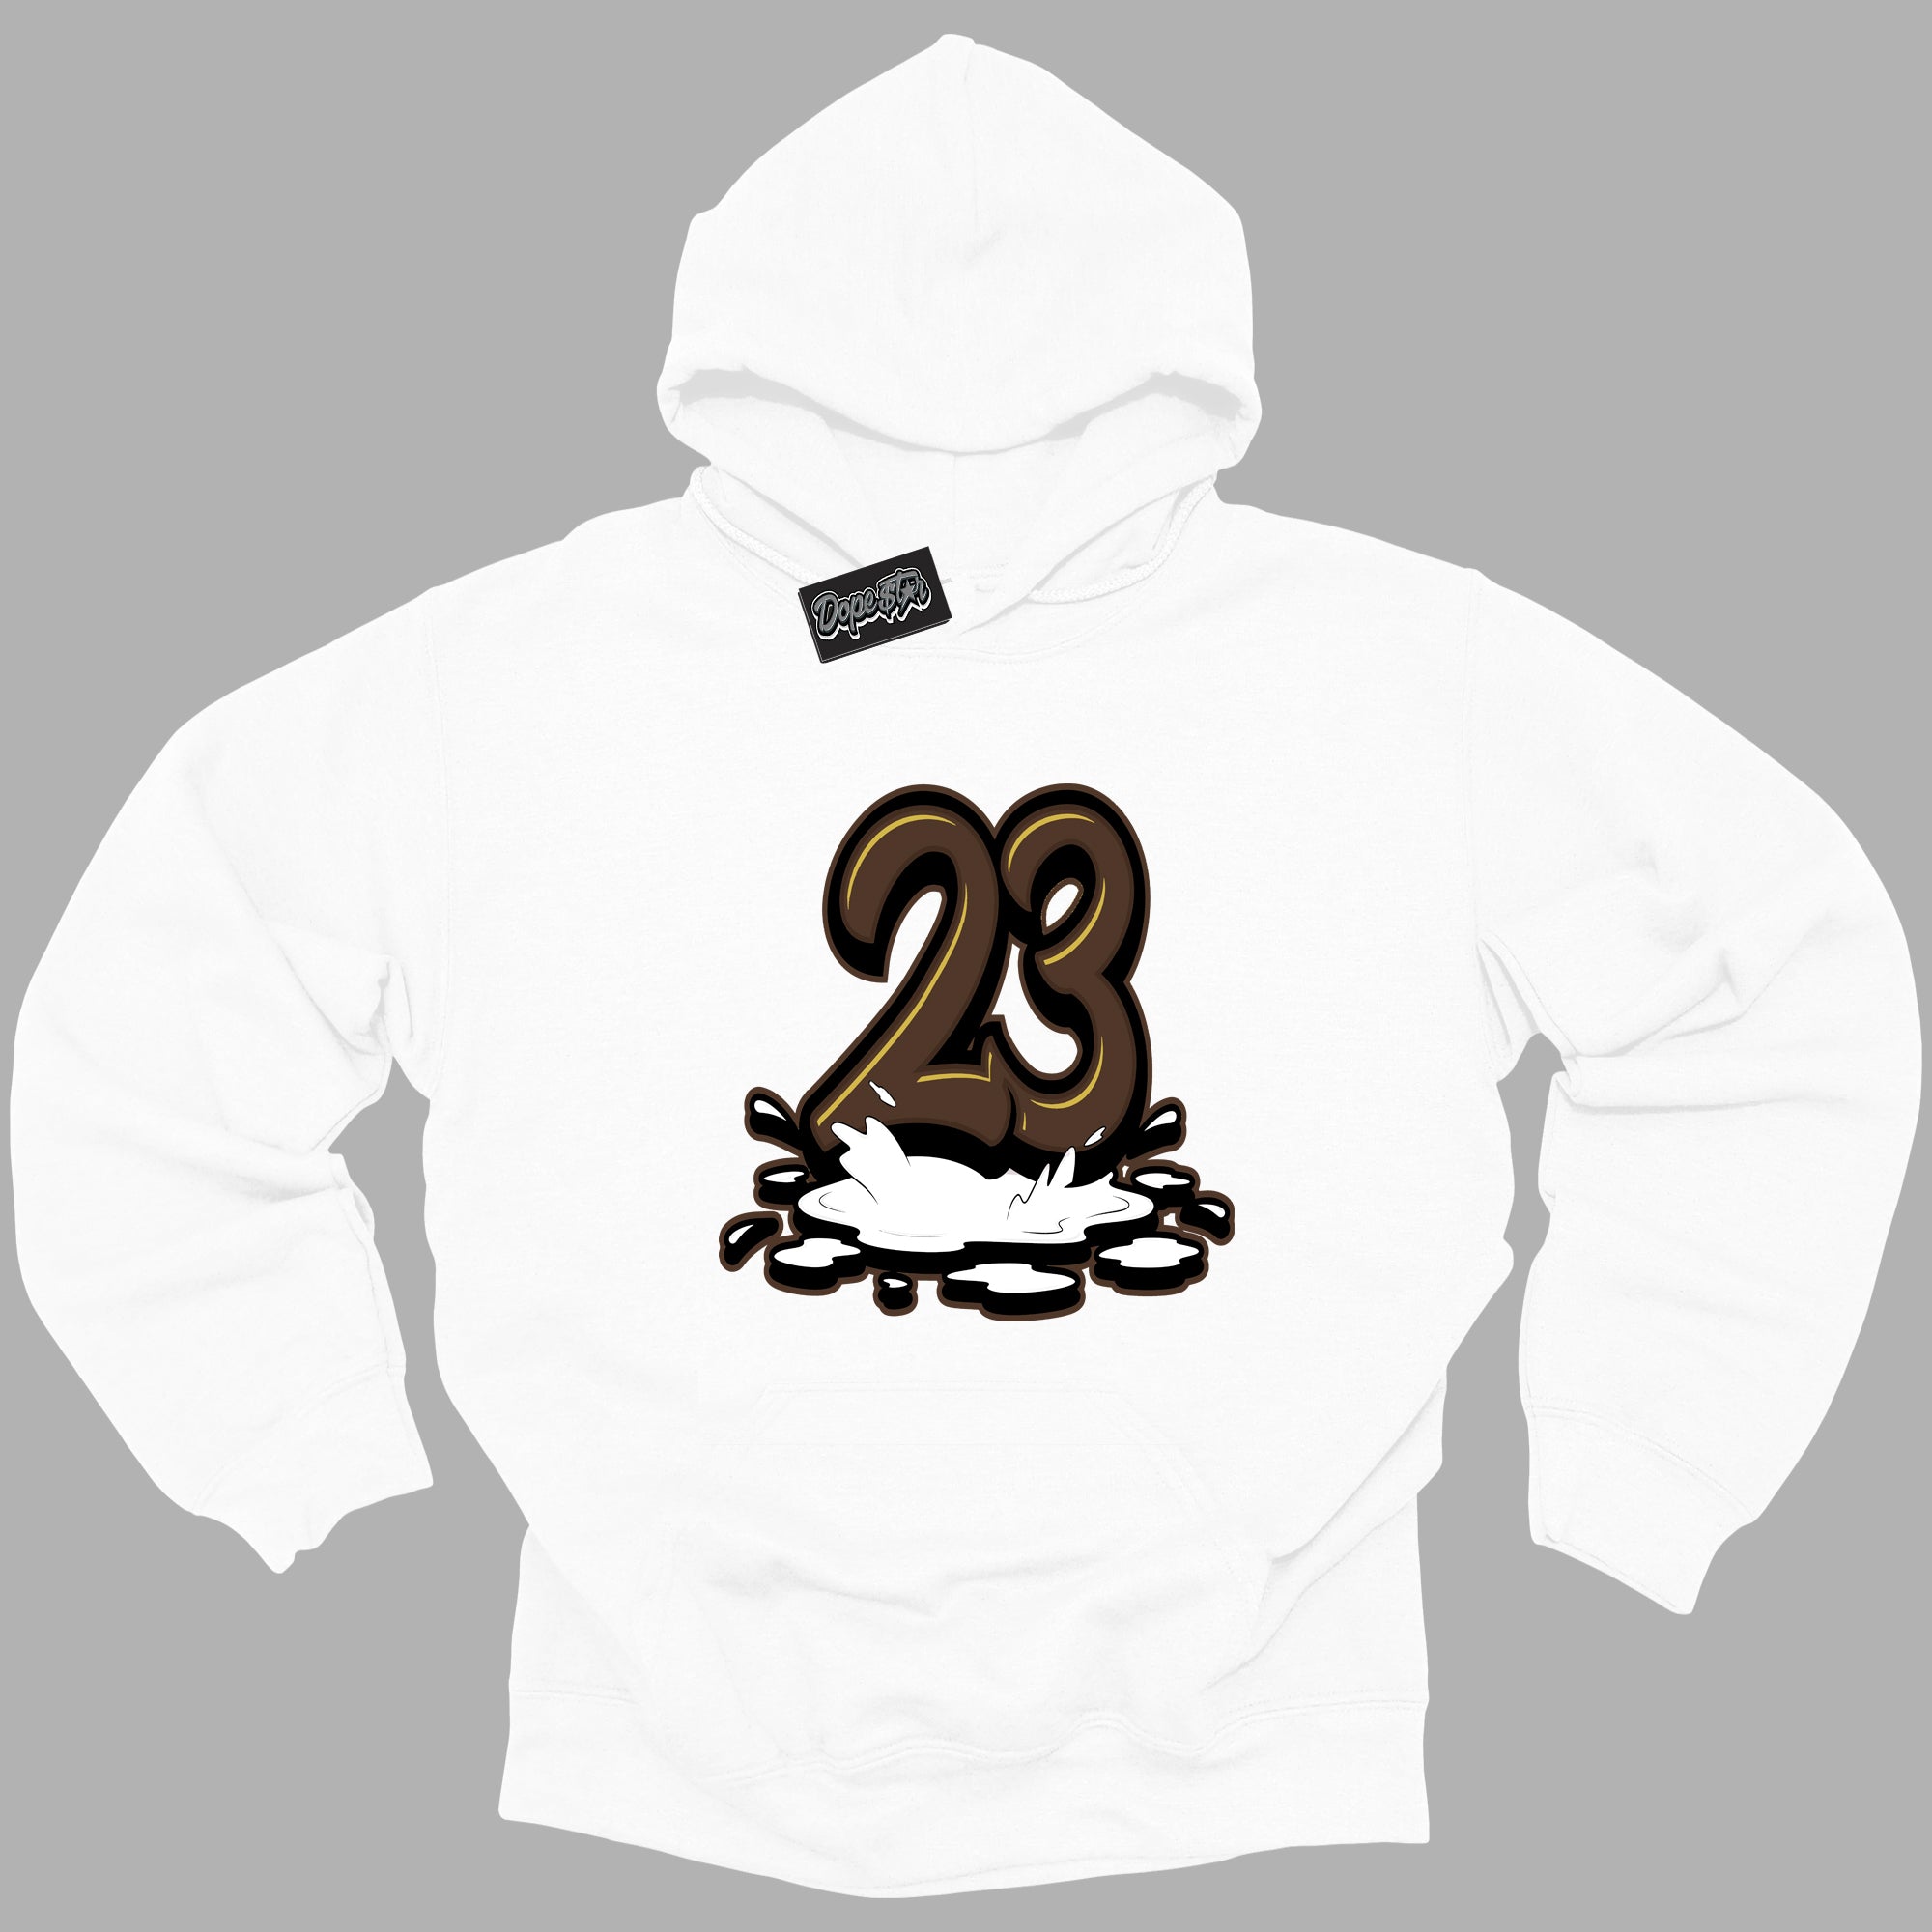 Cool White Graphic DopeStar Hoodie with “ 23 Melting “ print, that perfectly matches Palomino 1s sneakers